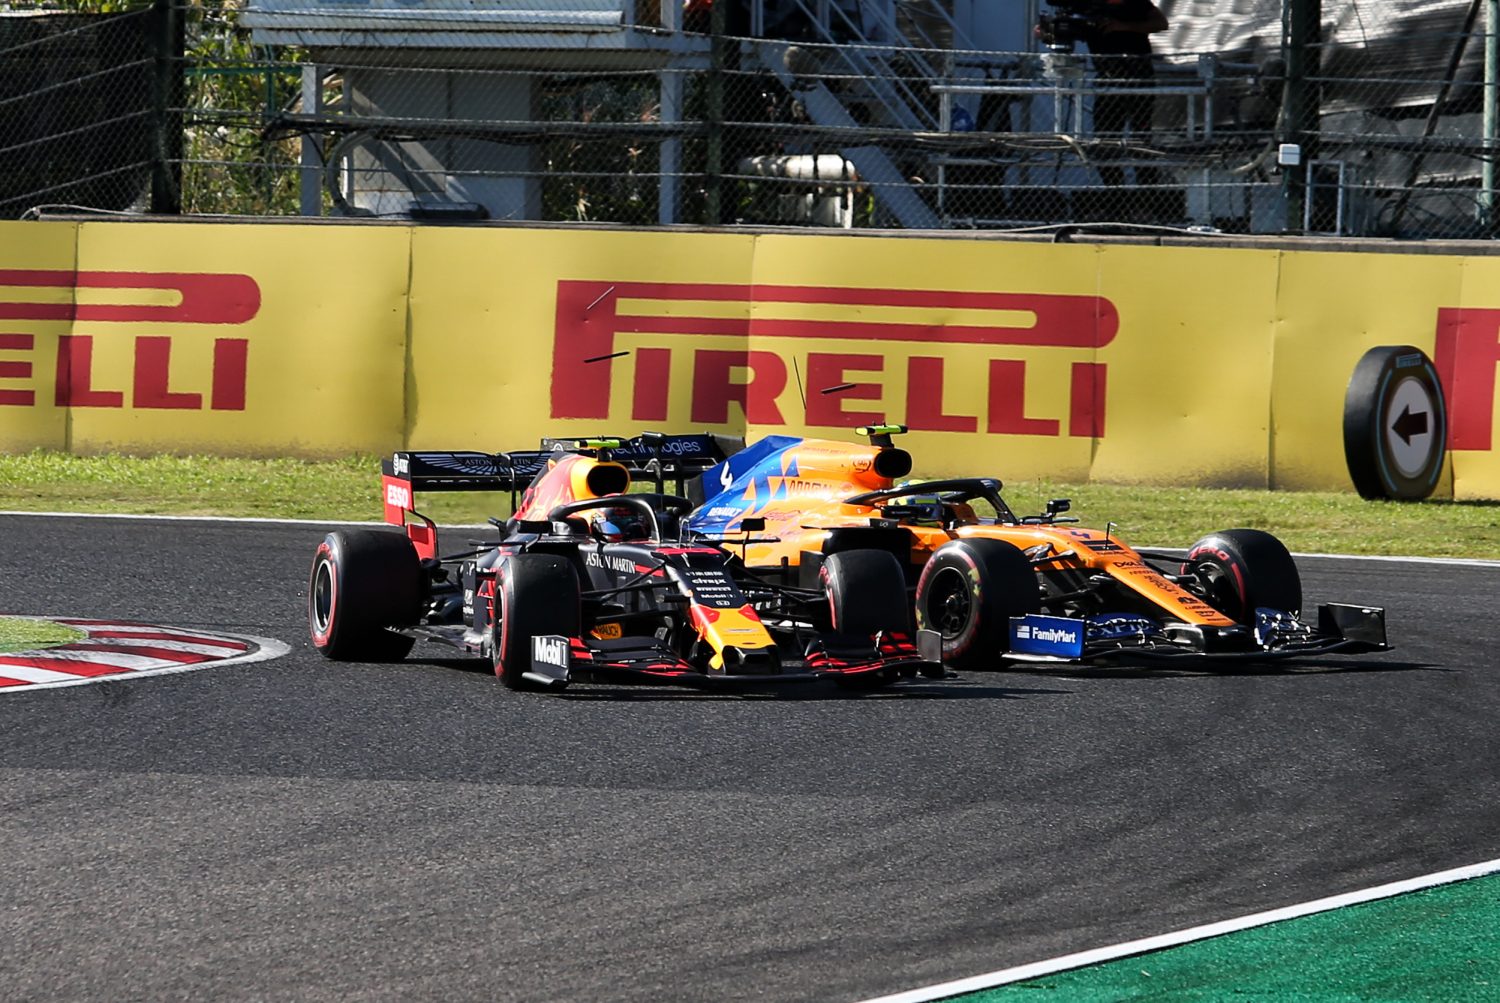 Norris: No issues with Albon late lunge despite contact